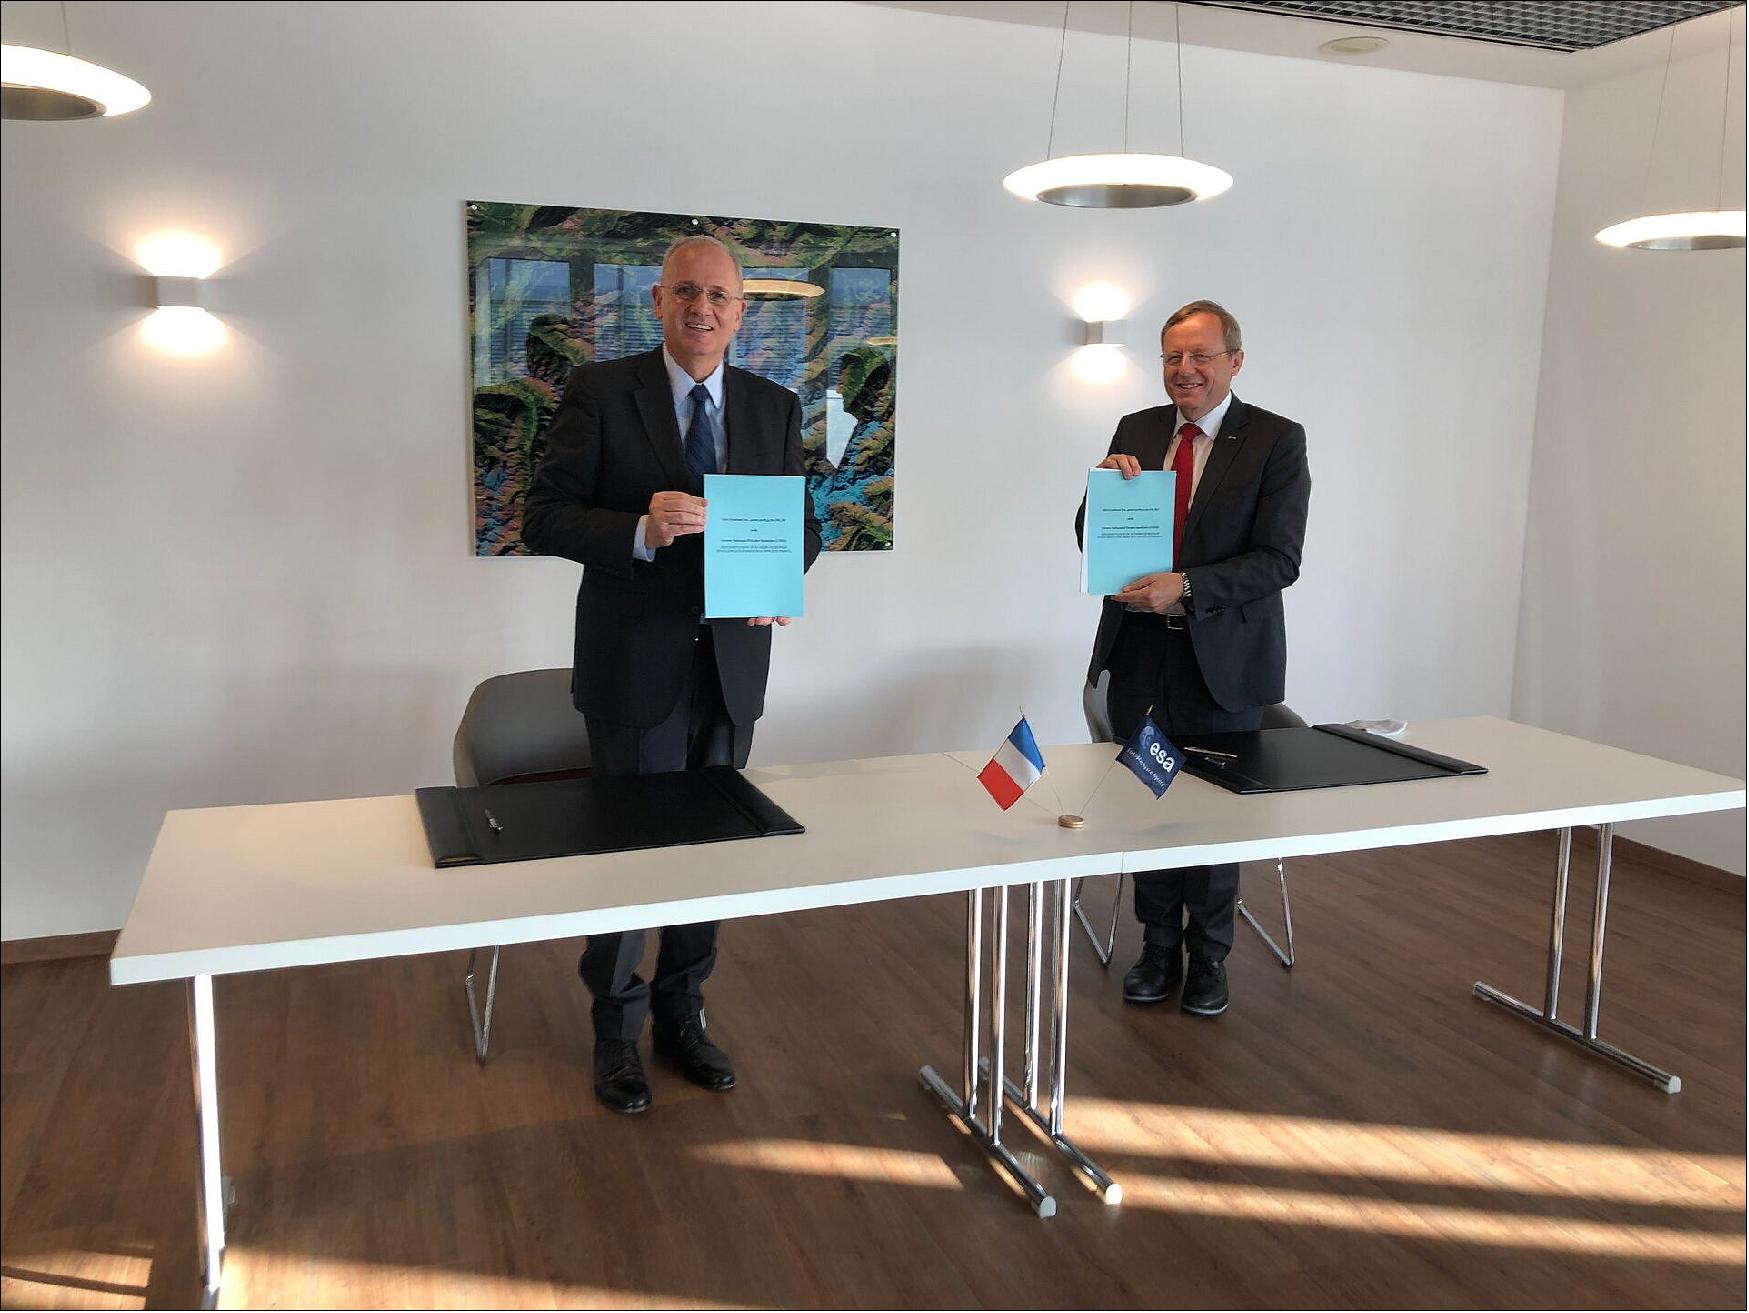 Figure 104: The ESERO France contract was signed on 23 June 2020. From left to right: CNES President Jean-Yves Le Gall and ESA Director General Jan Wörner (image credit: ESA)